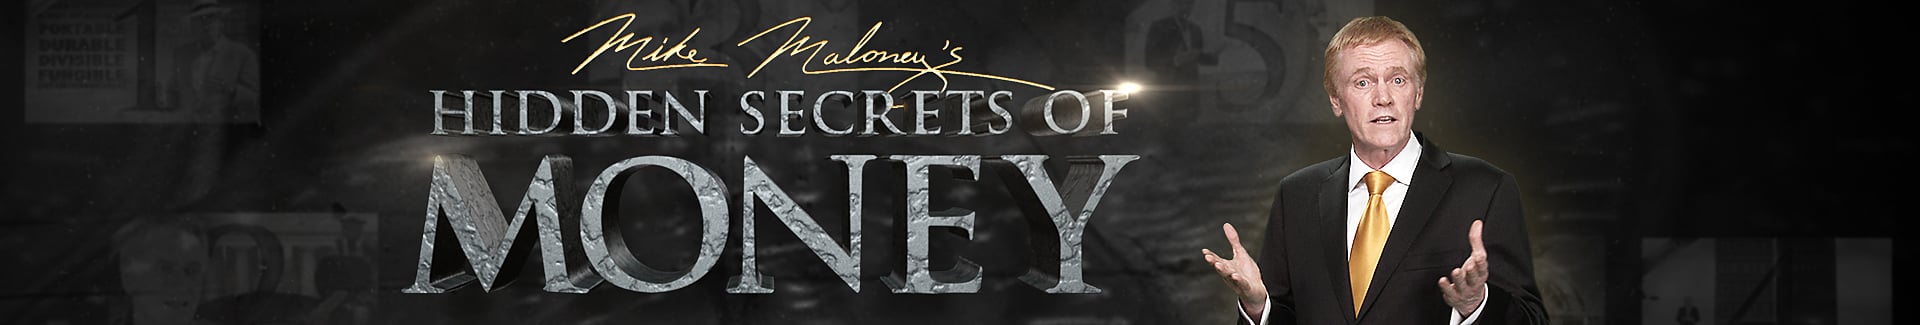 Hidden Secrets of Money Episode 4: The Biggest Scam in the History Of Mankind (in 7 Easy Steps)